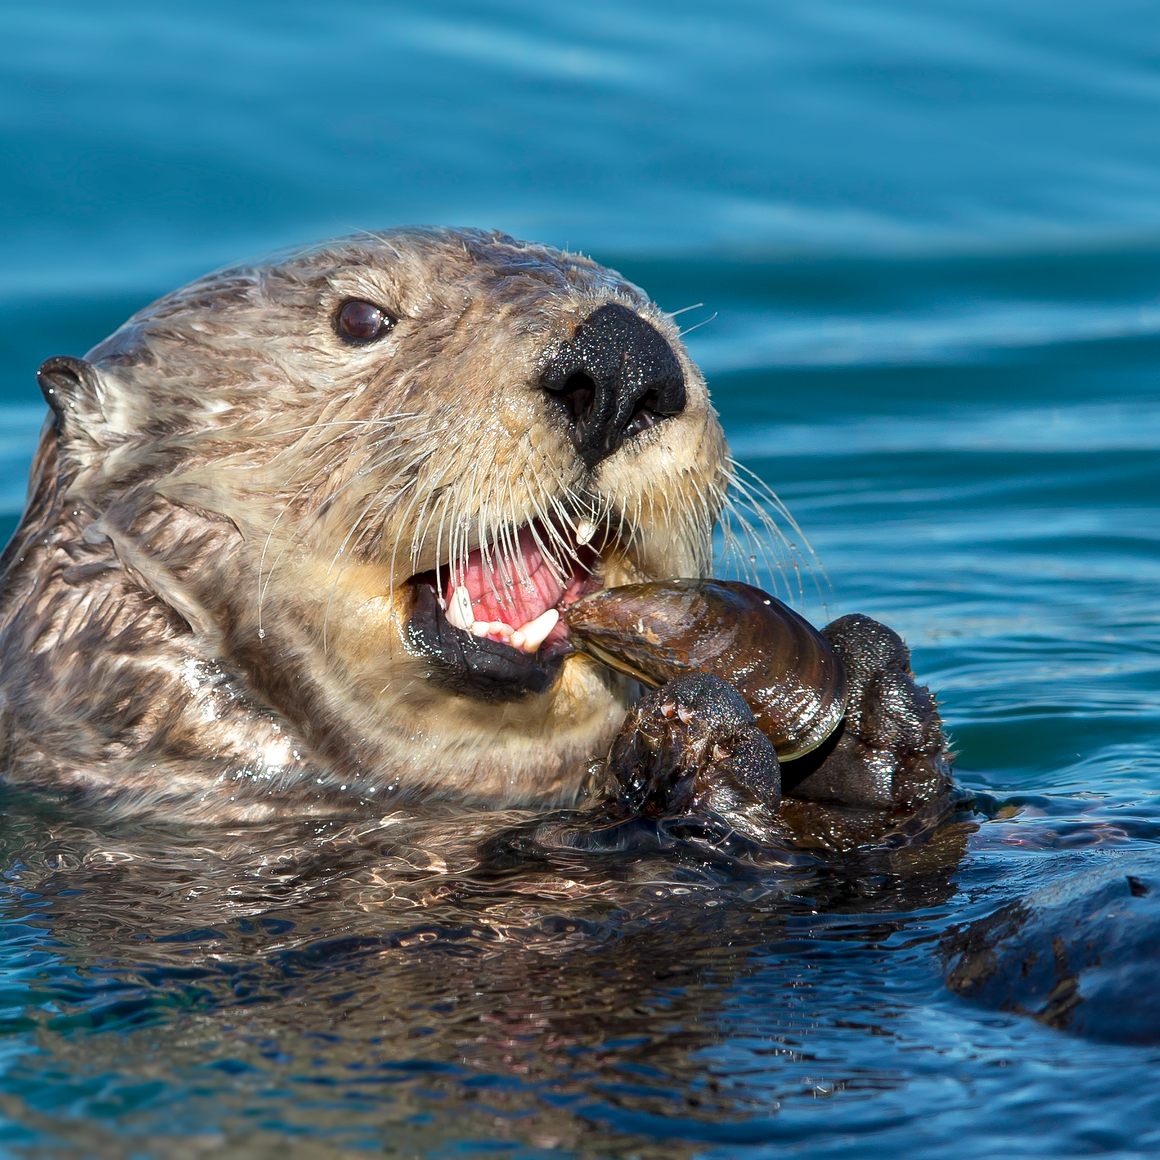 Sea otter eating mussel.